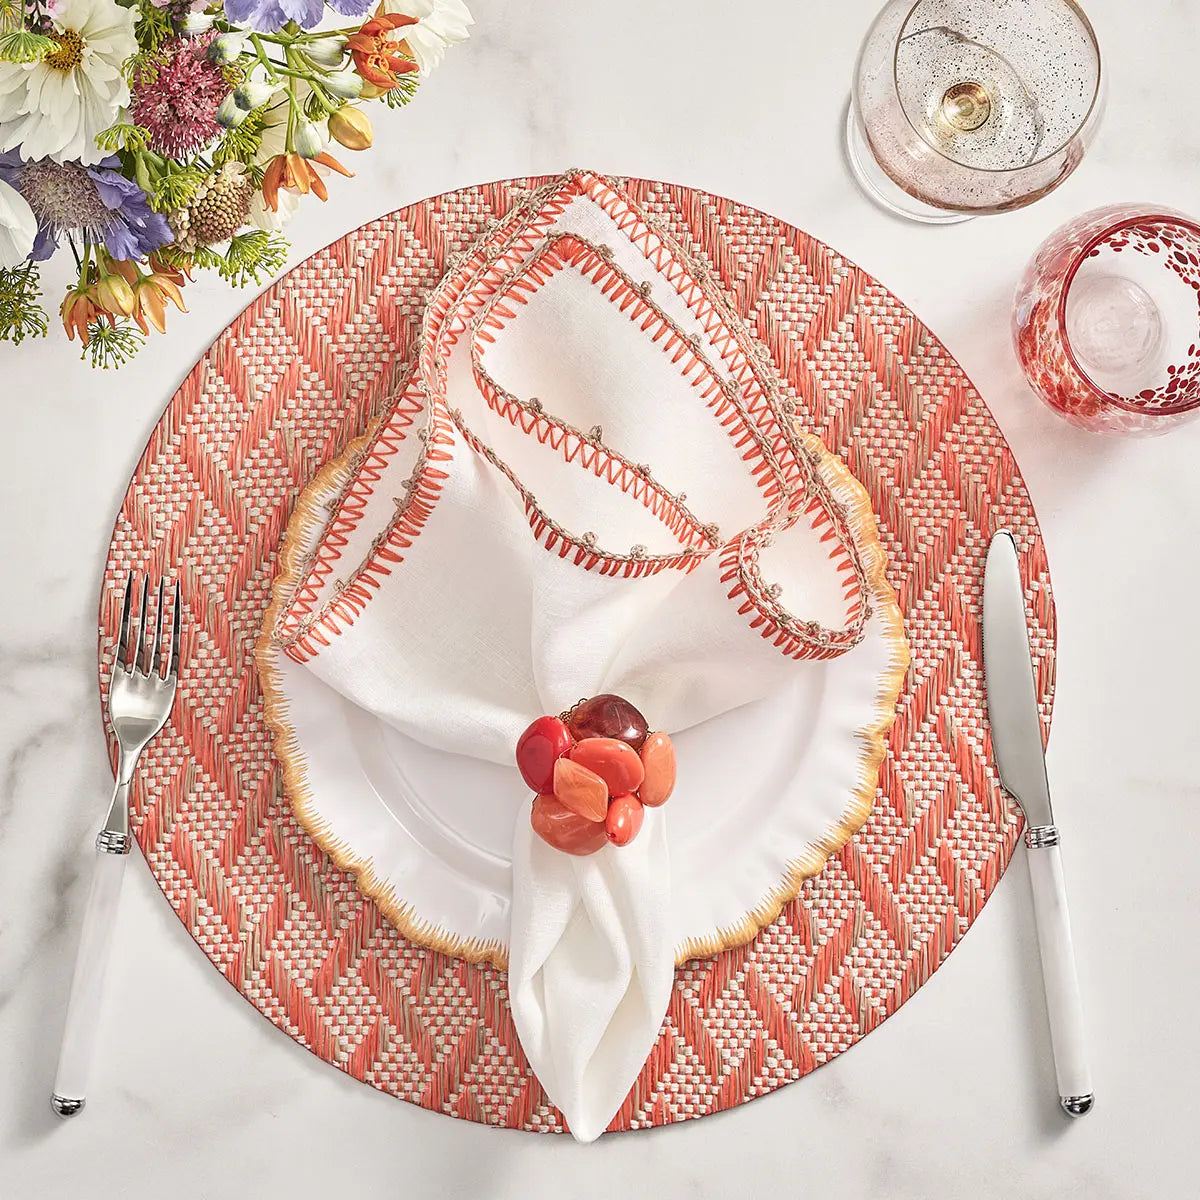 Kim Seybert Knotted Edge Napkin in White Natural and Orange set on a table